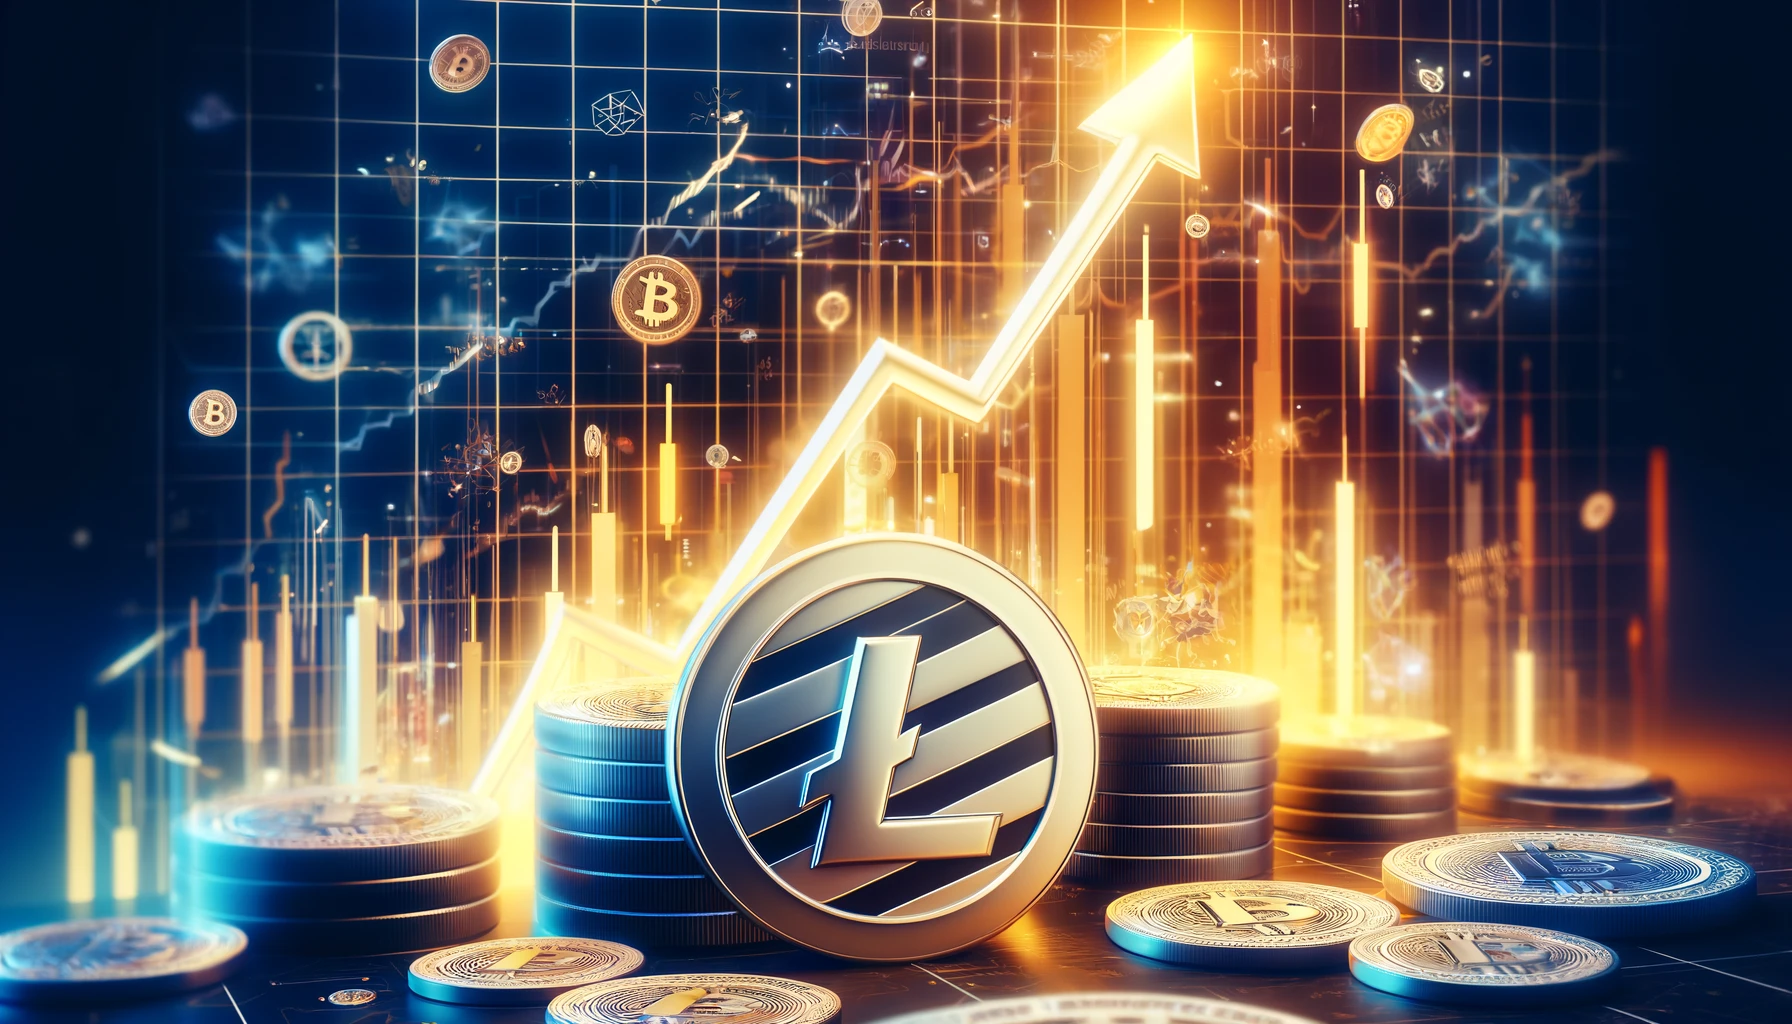 Litecoin Doubles Activity To Beat Bitcoin & Ethereum, Becomes Most Used Crypto